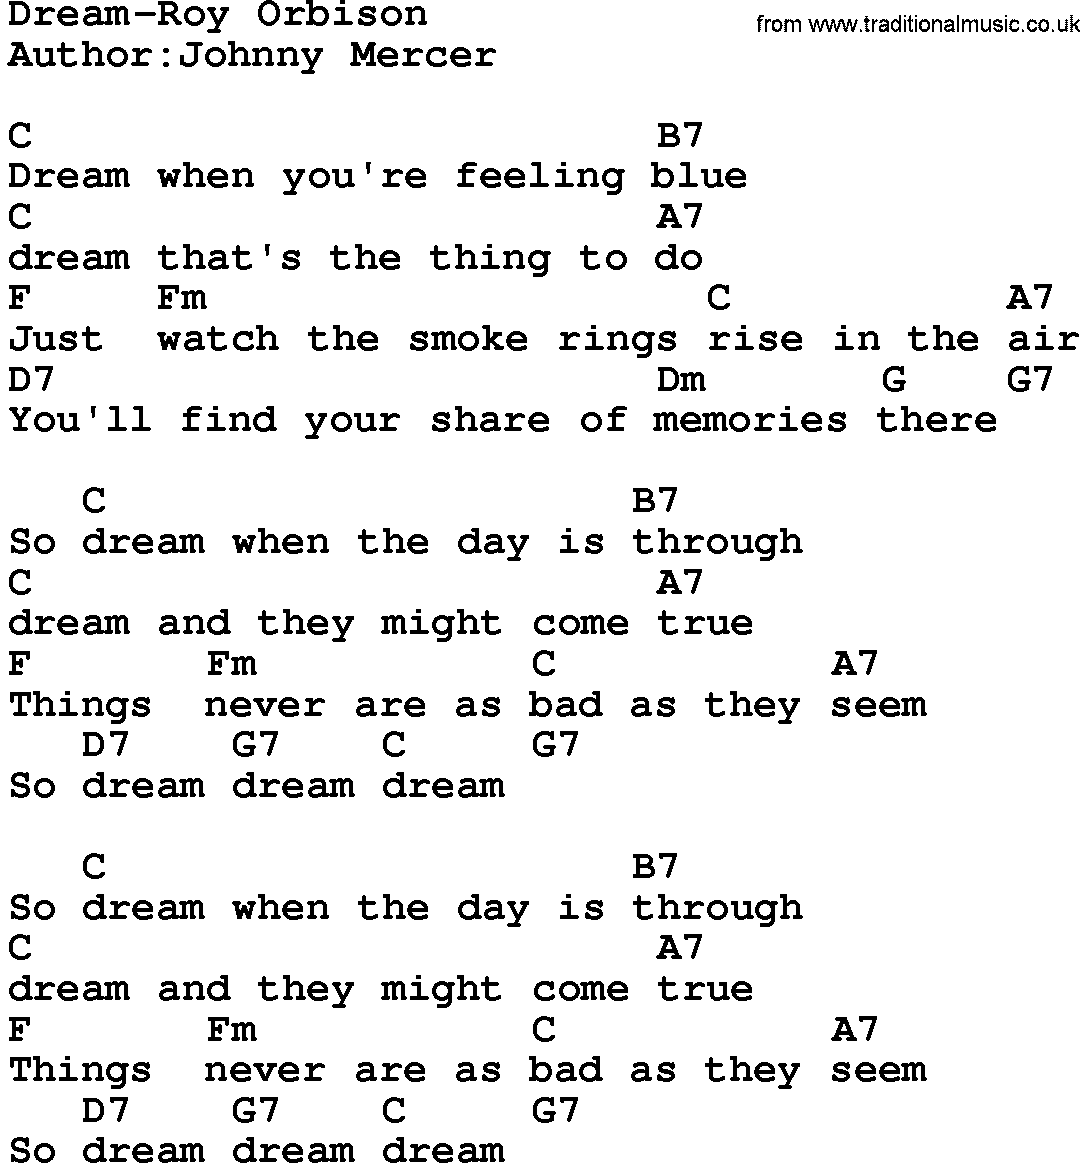 Country music song: Dream-Roy Orbison lyrics and chords